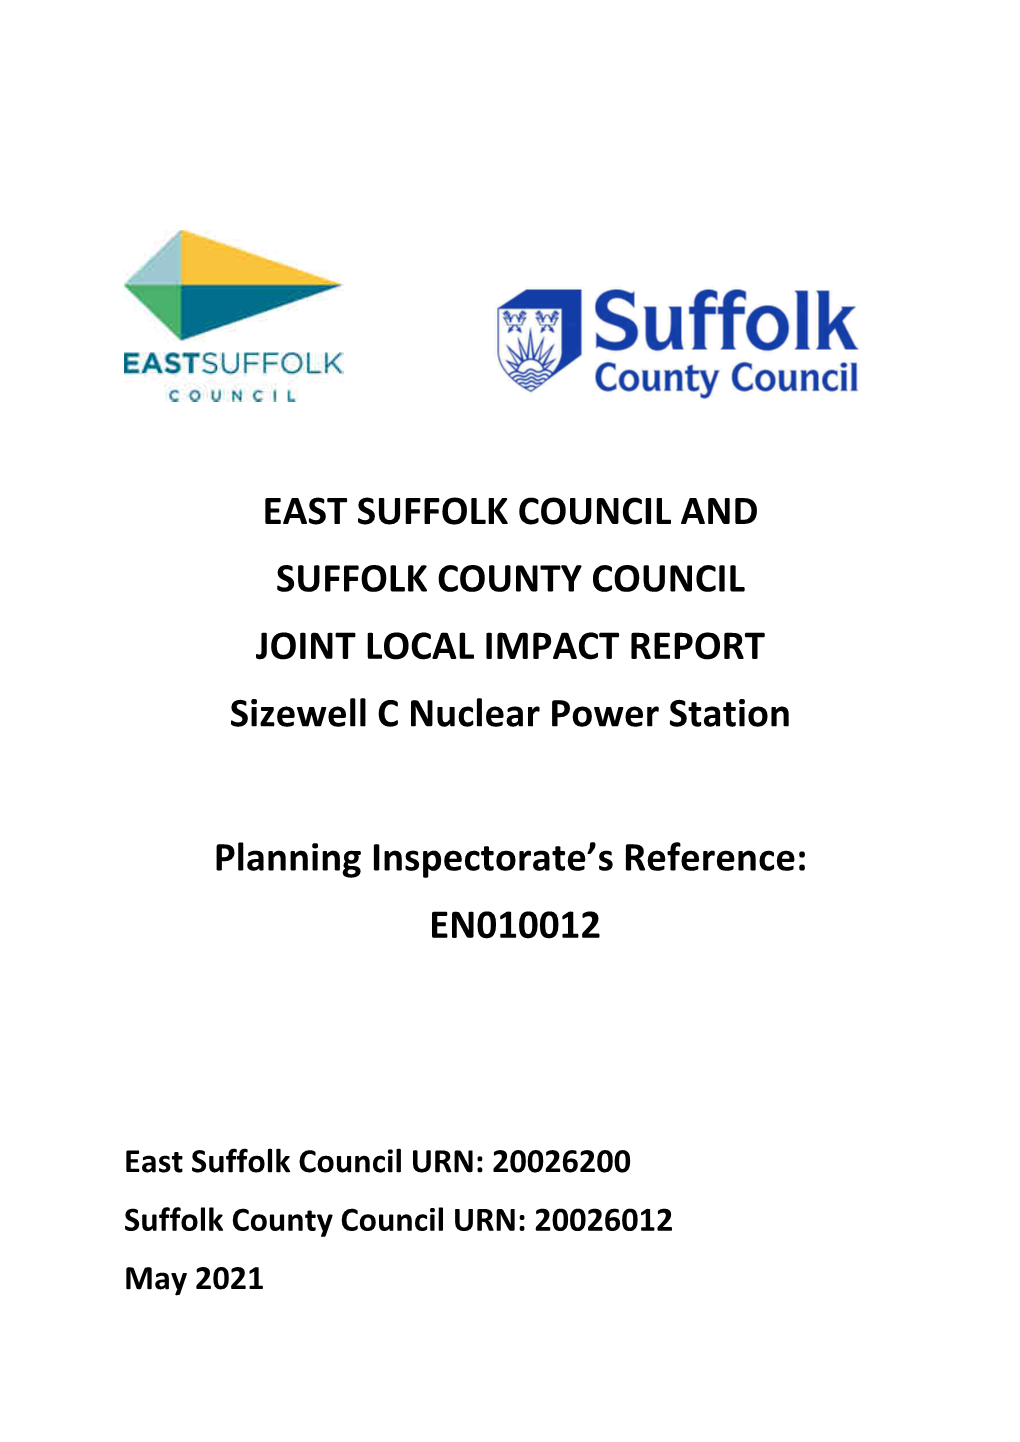 East Suffolk Council and Suffolk County Council